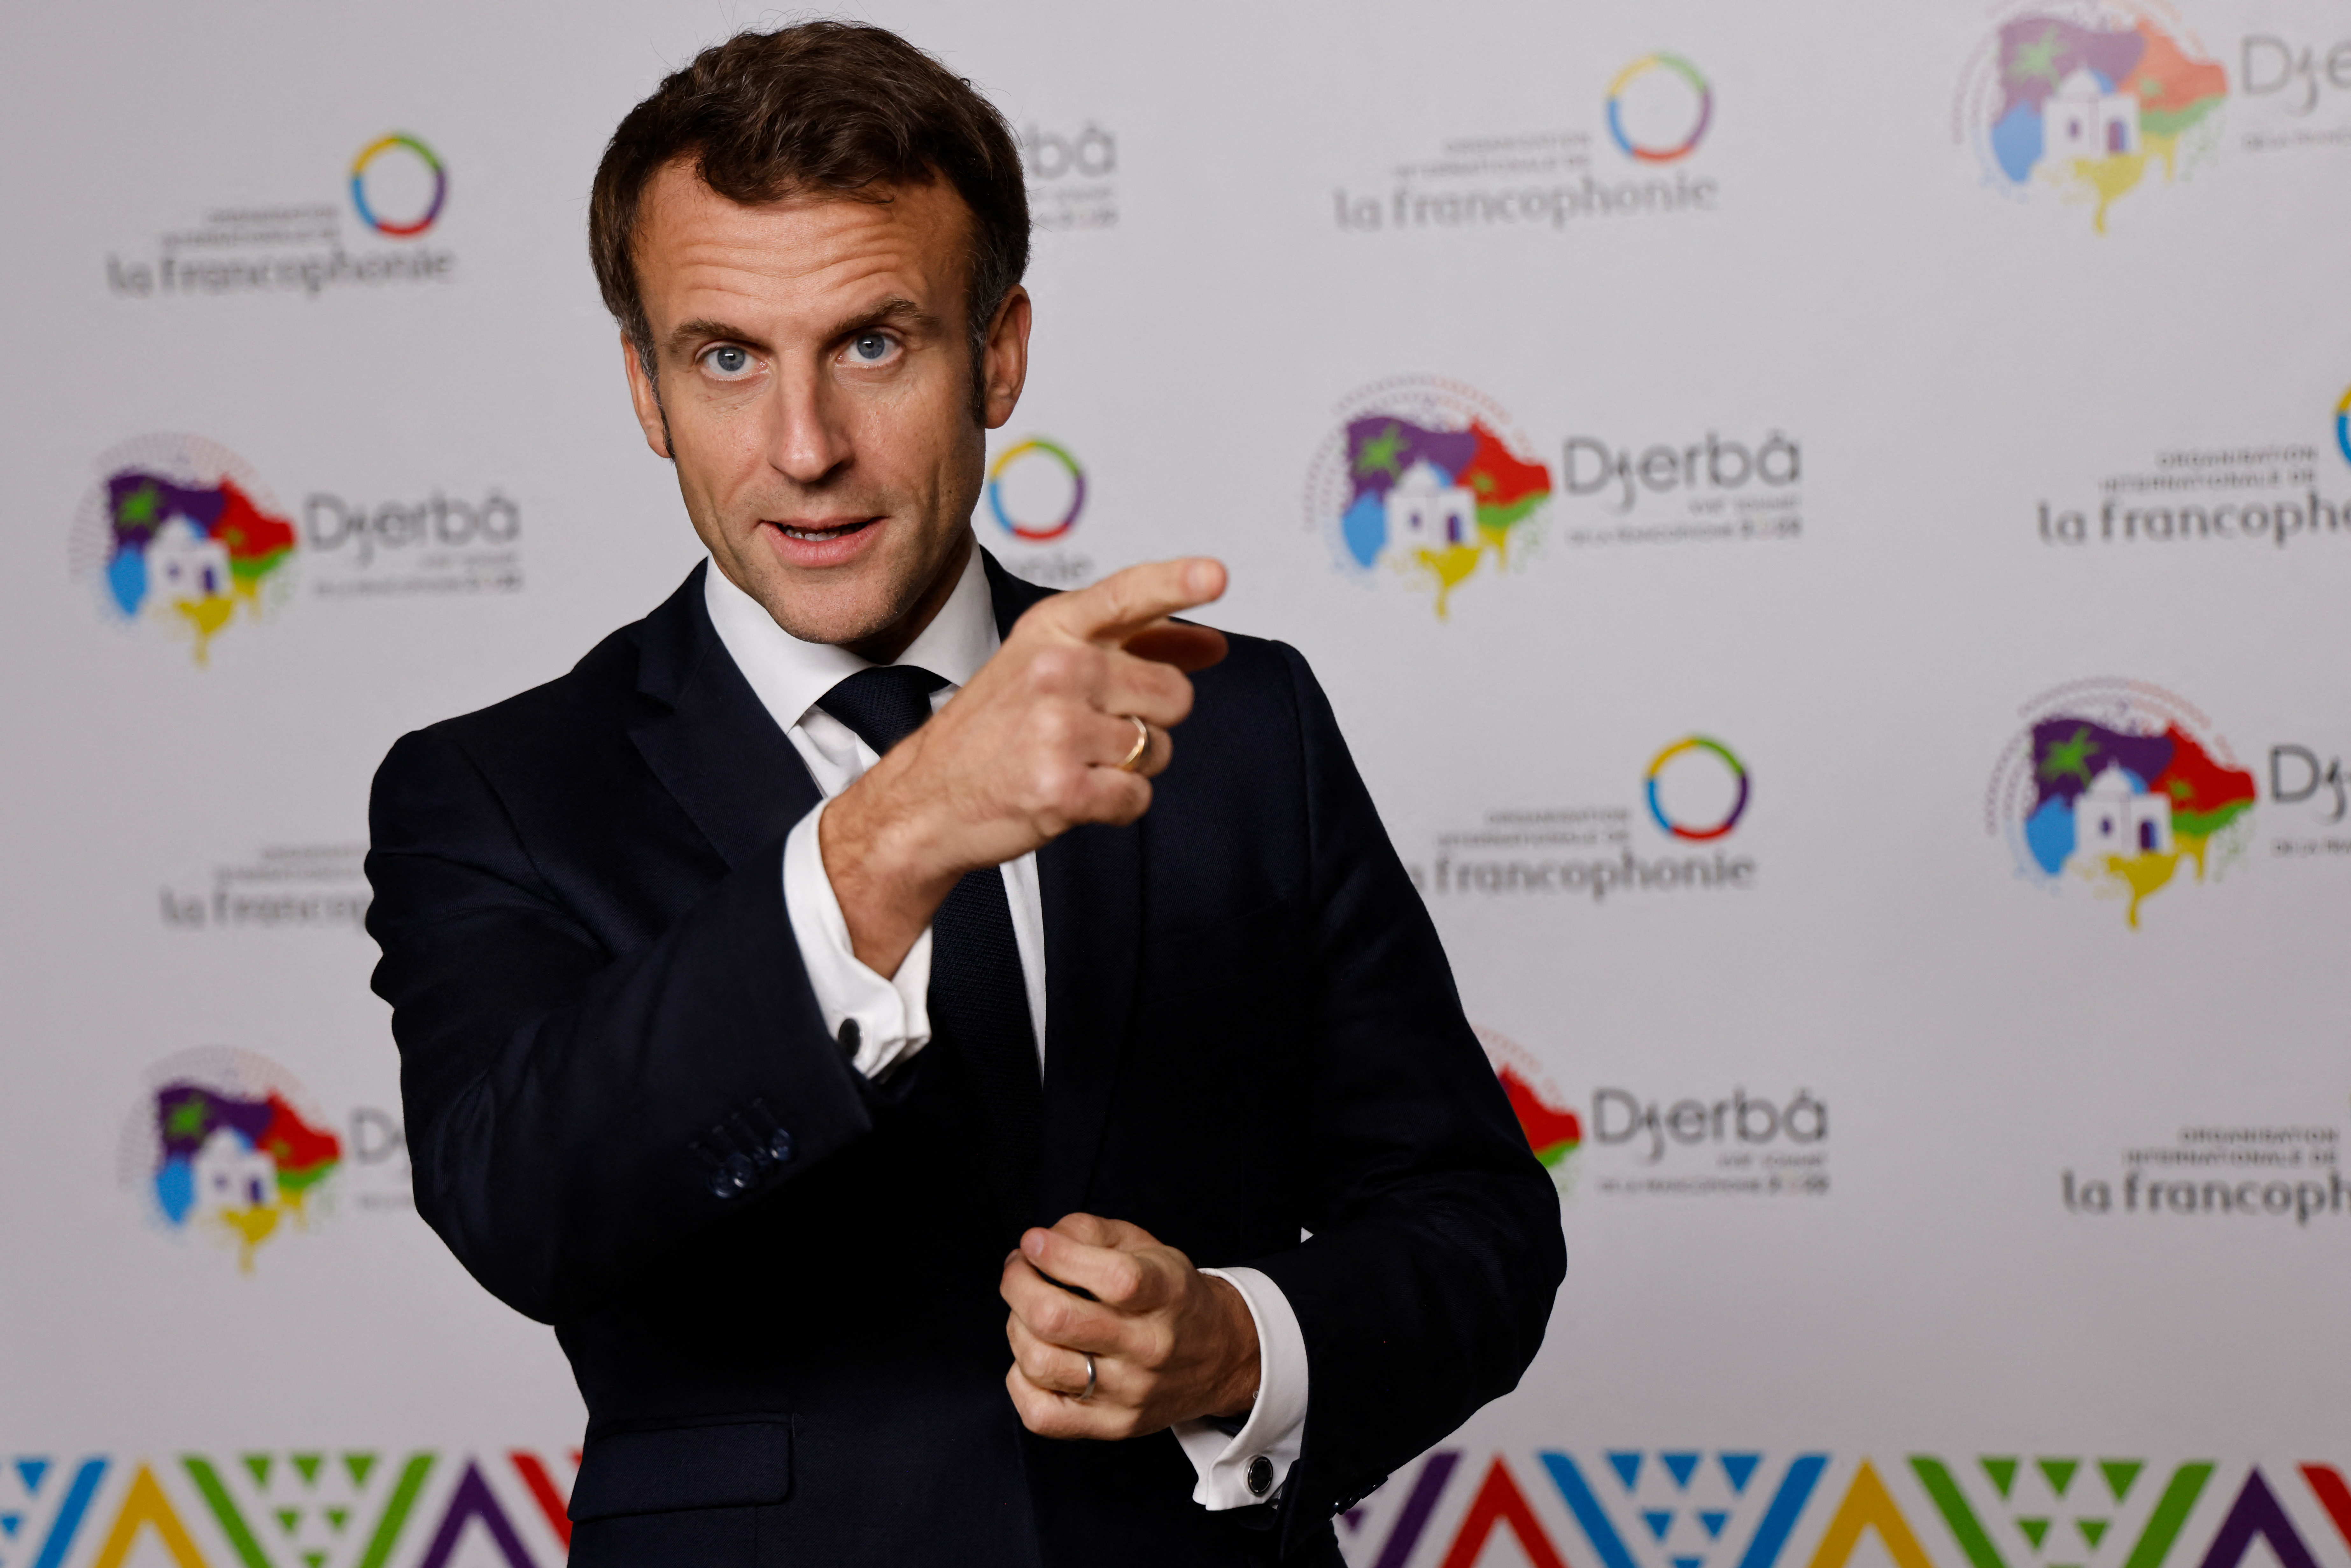 France's President Emmanuel Macron speaks to the press during at the 18th Francophone countries Summit in Djerba, on Saturday. Ludovic Marin/ AFP